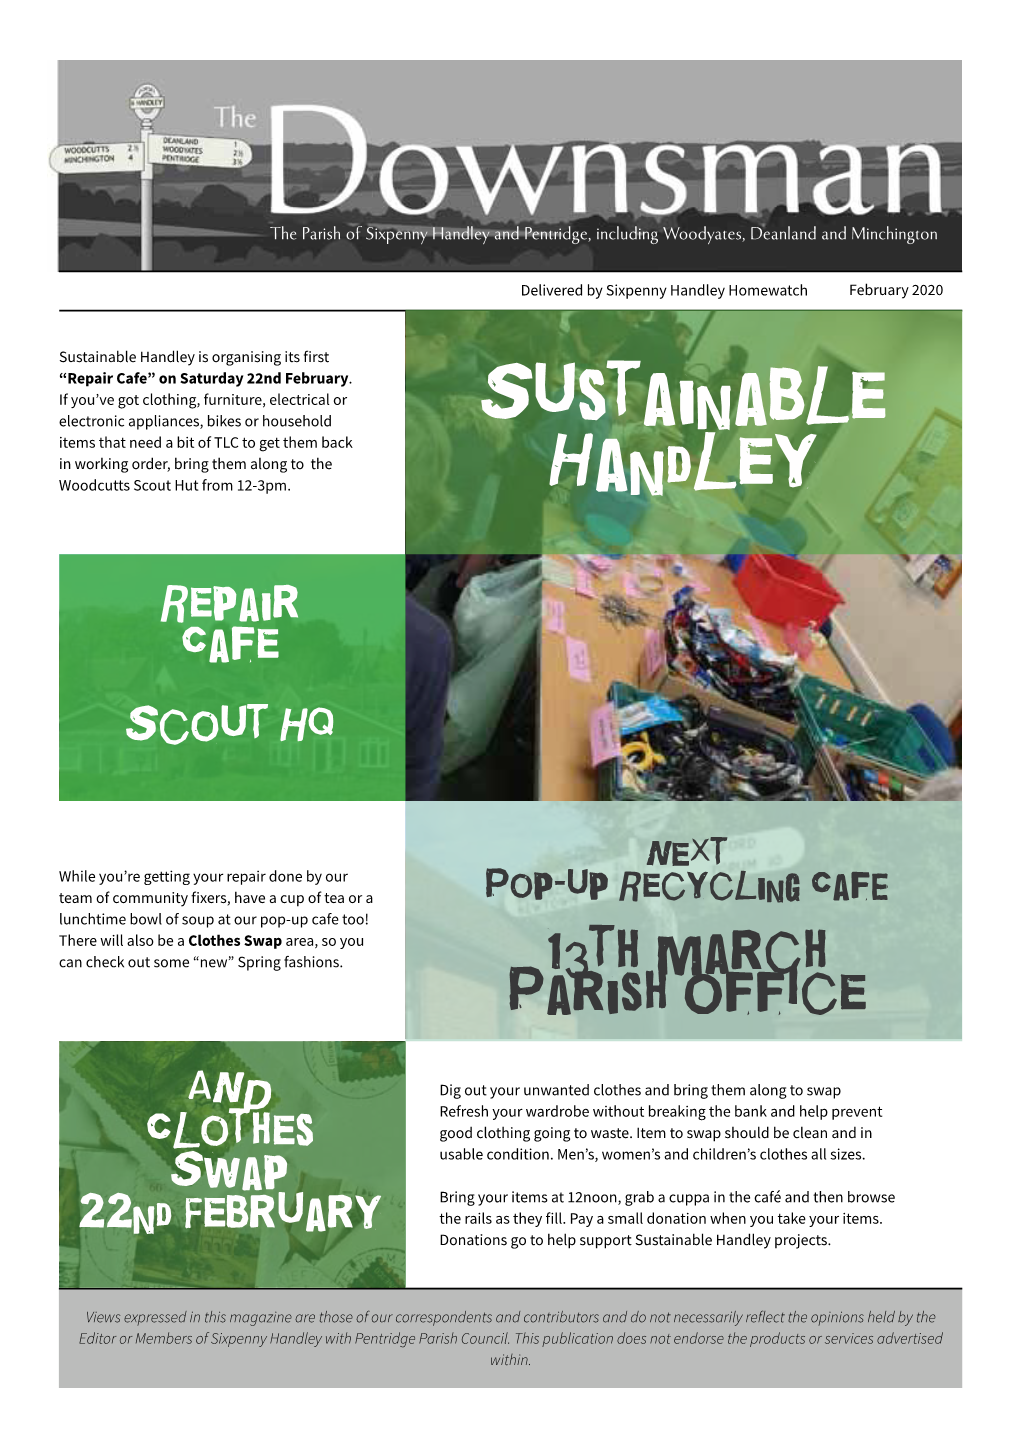 Sustainable Handley Is Organising Its First “Repair Cafe” on Saturday 22Nd February